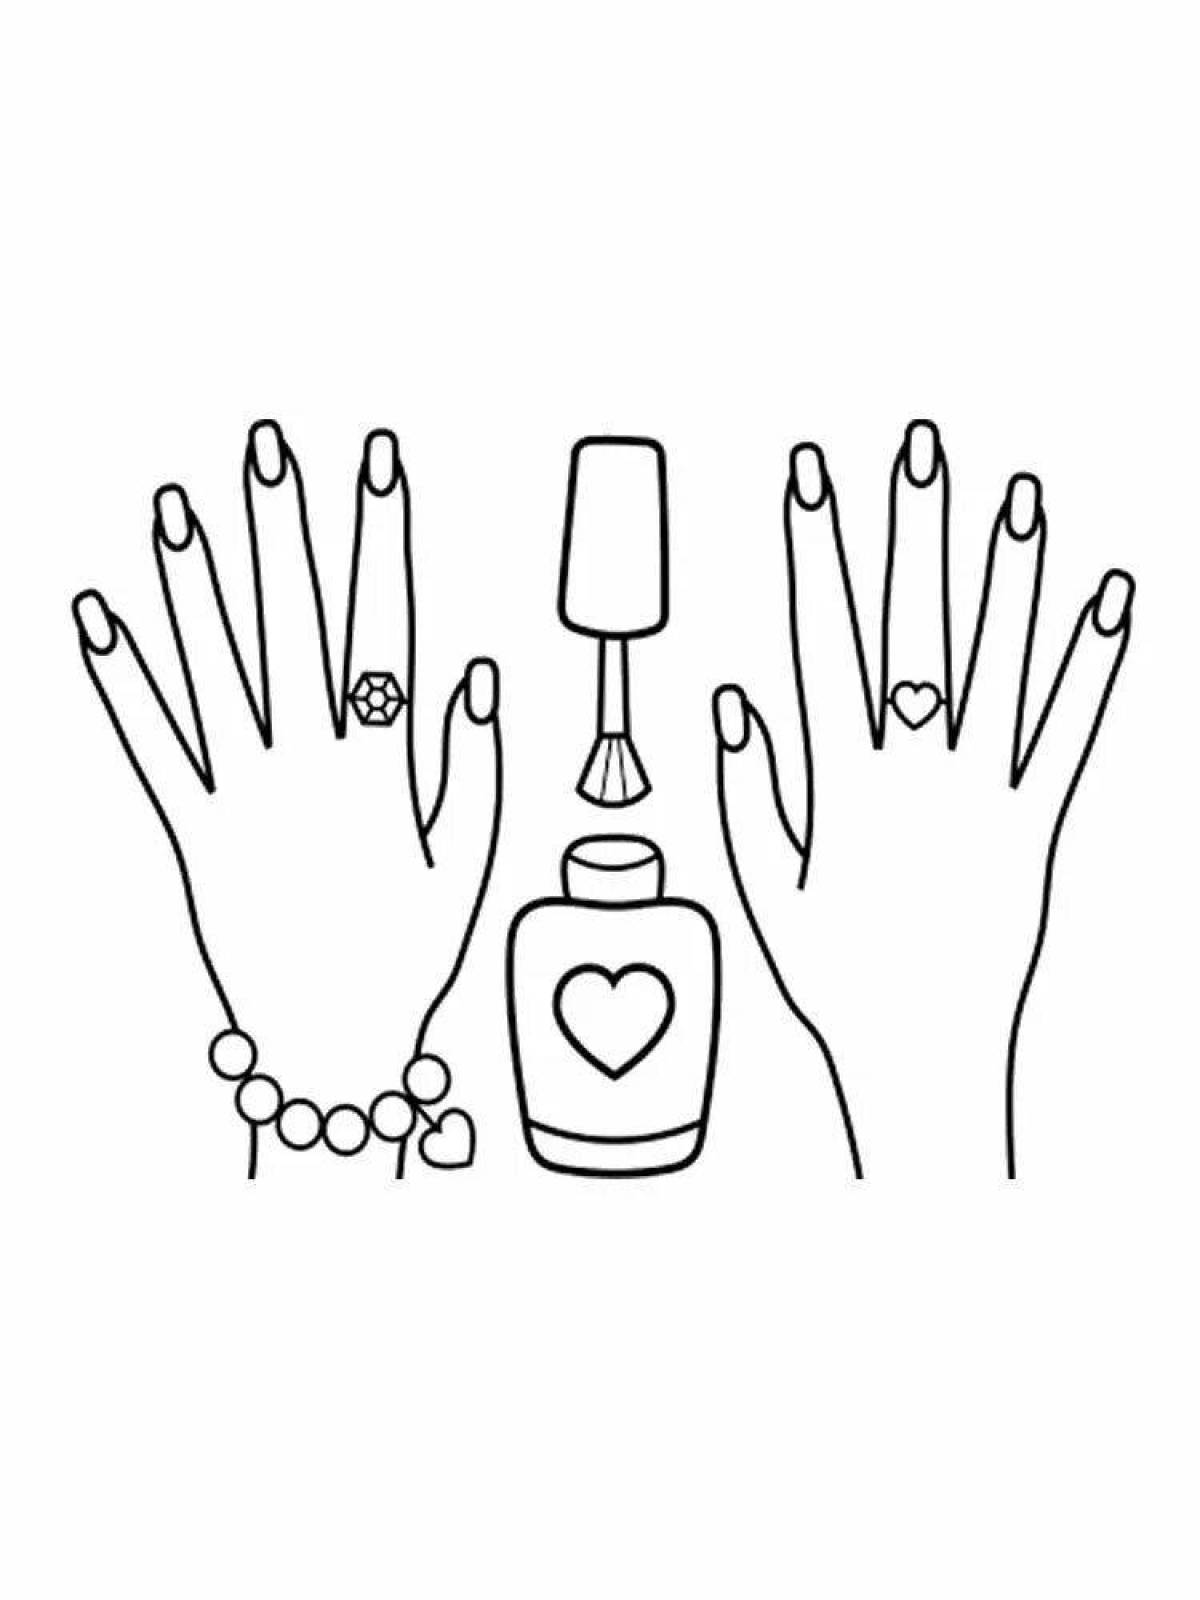 Coloring book stylish hand with long nails